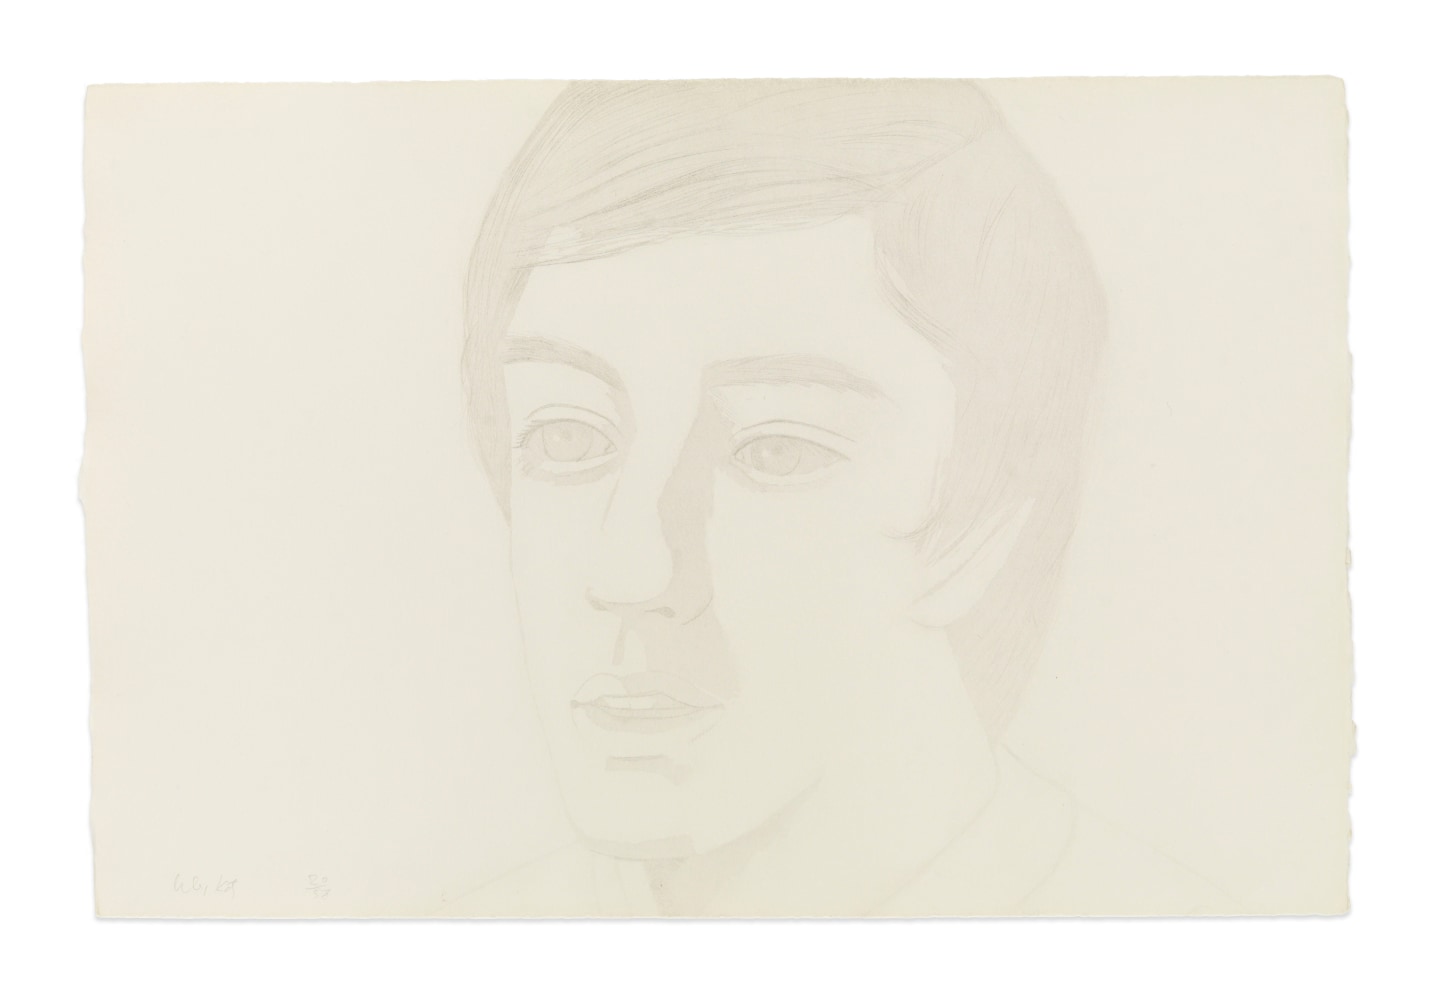 Drypoint portrait by Alex Katz featuring a faint 3/4 view of a man with his mouth slightly open